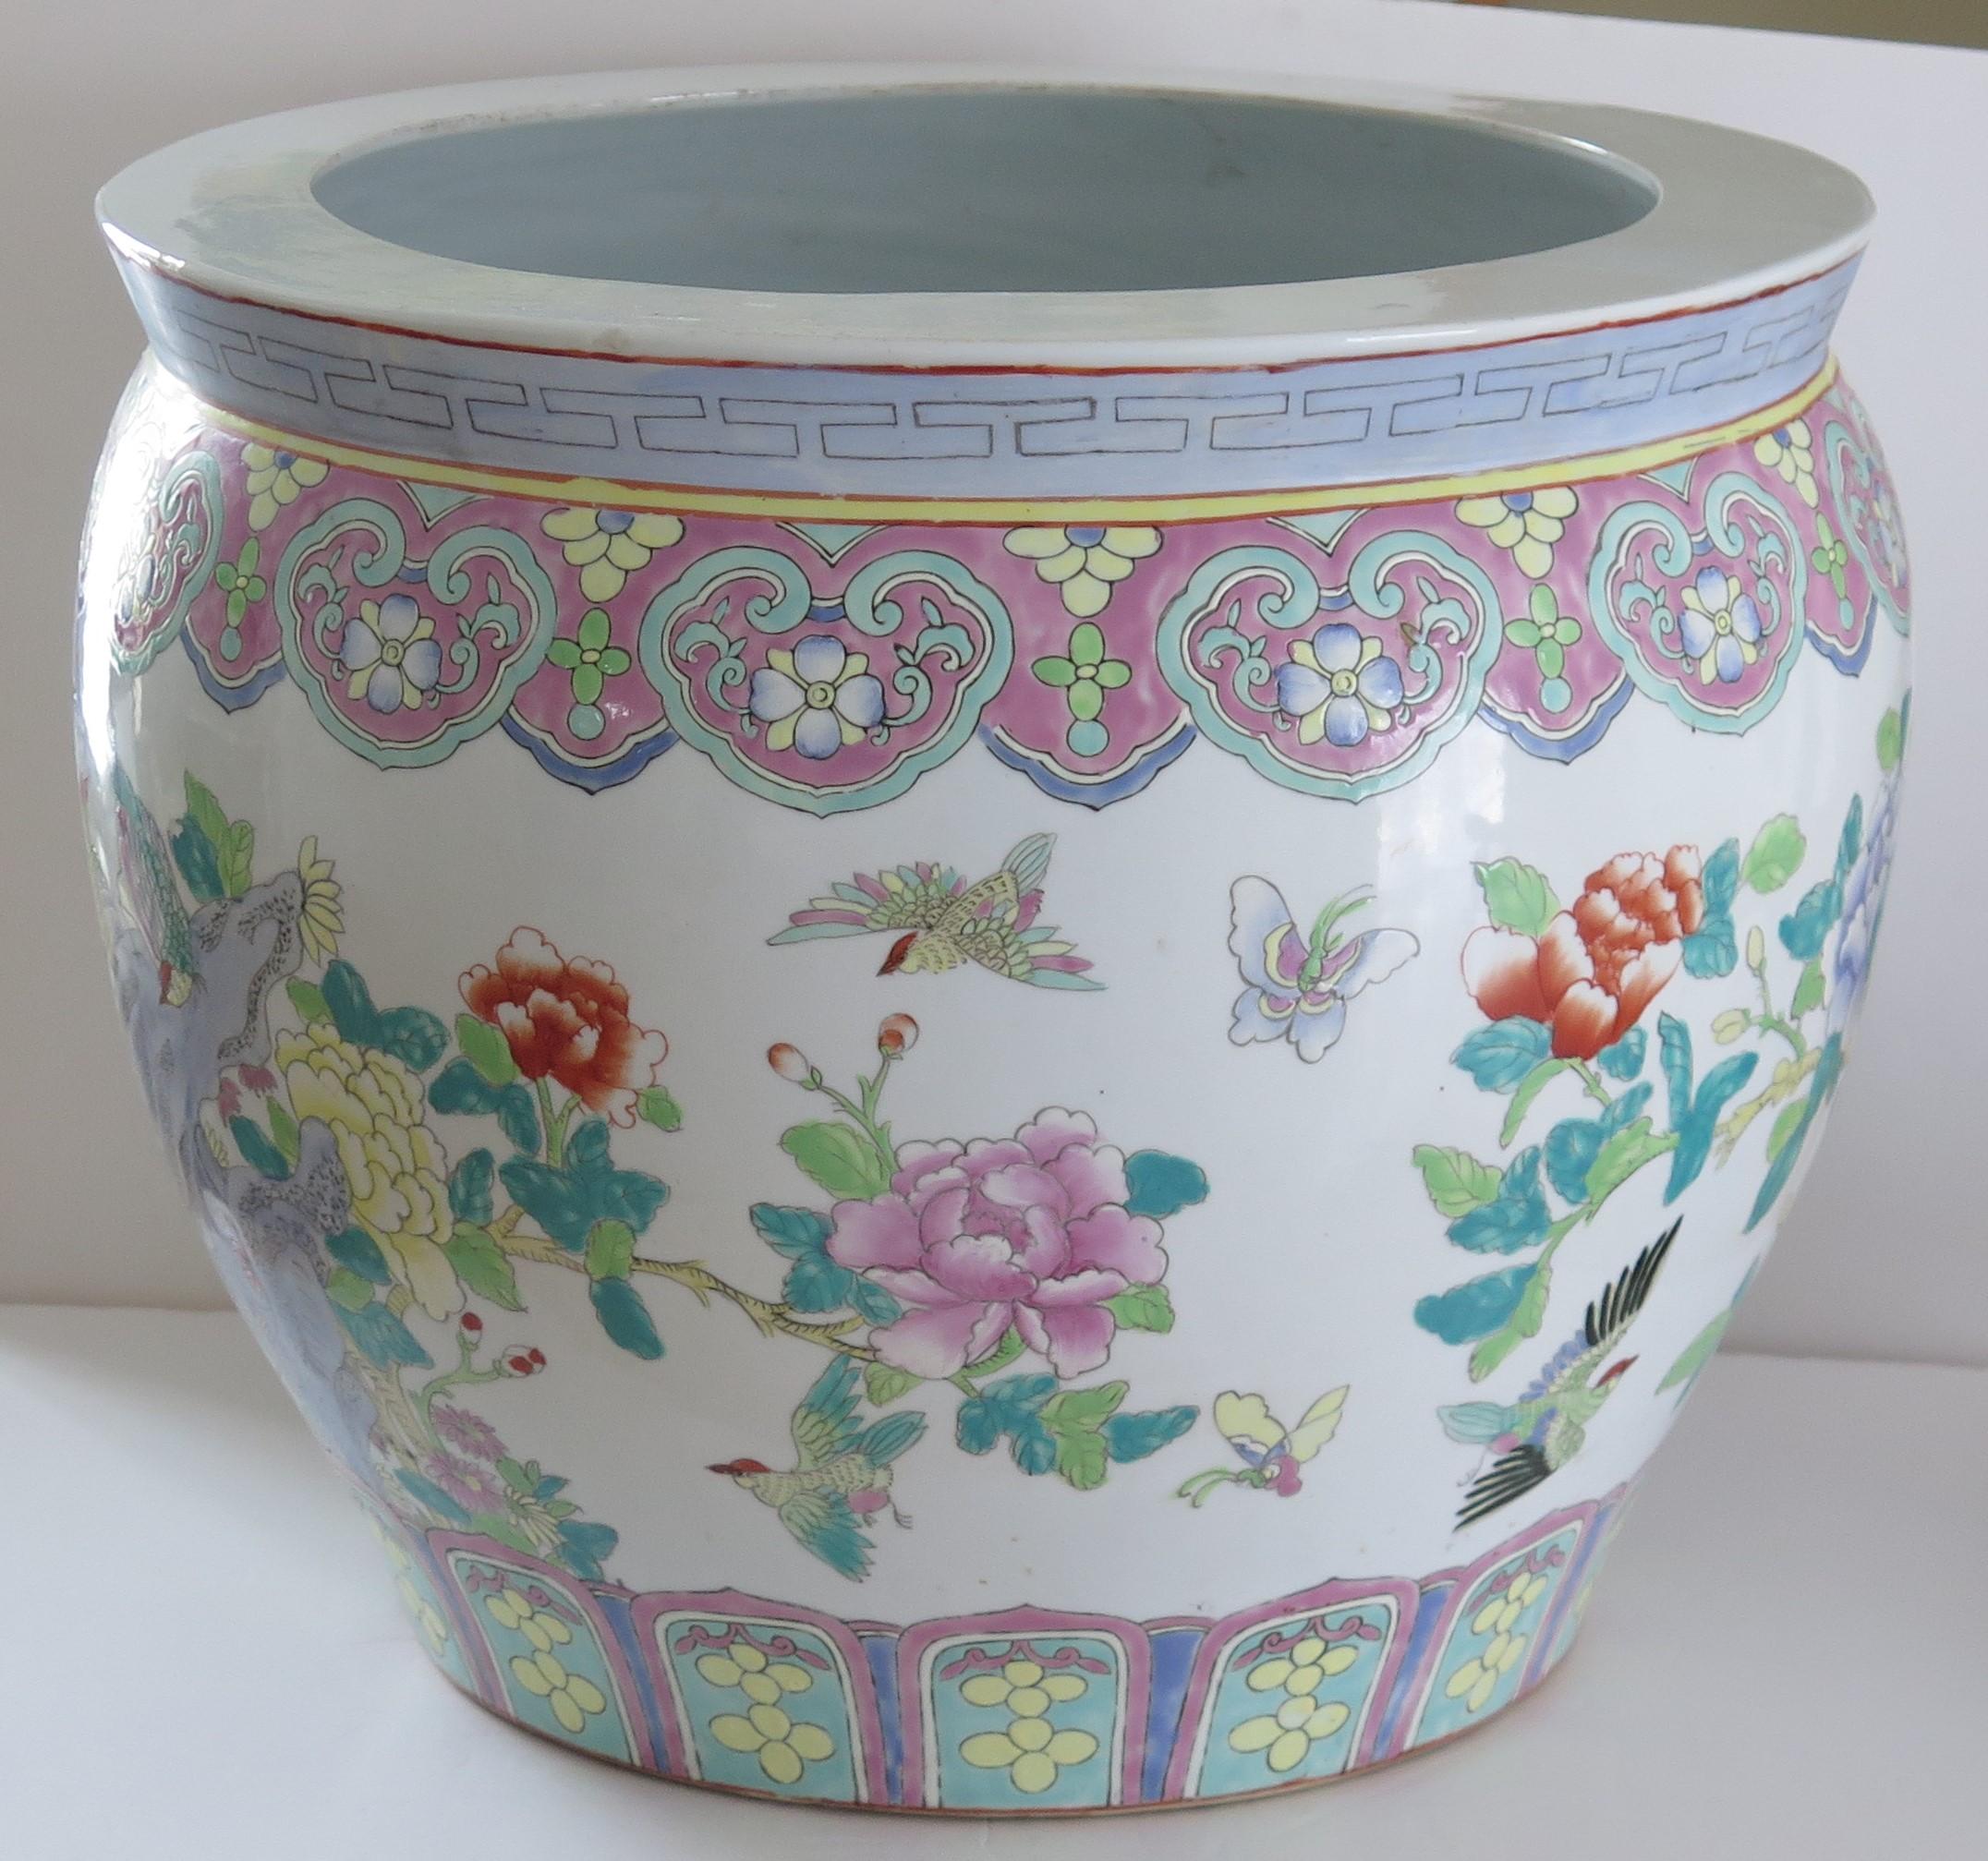 Chinese Export Large Chinese Porcelain Jardiniere or Fish Bowl Hand Painted, Mid-20th Century